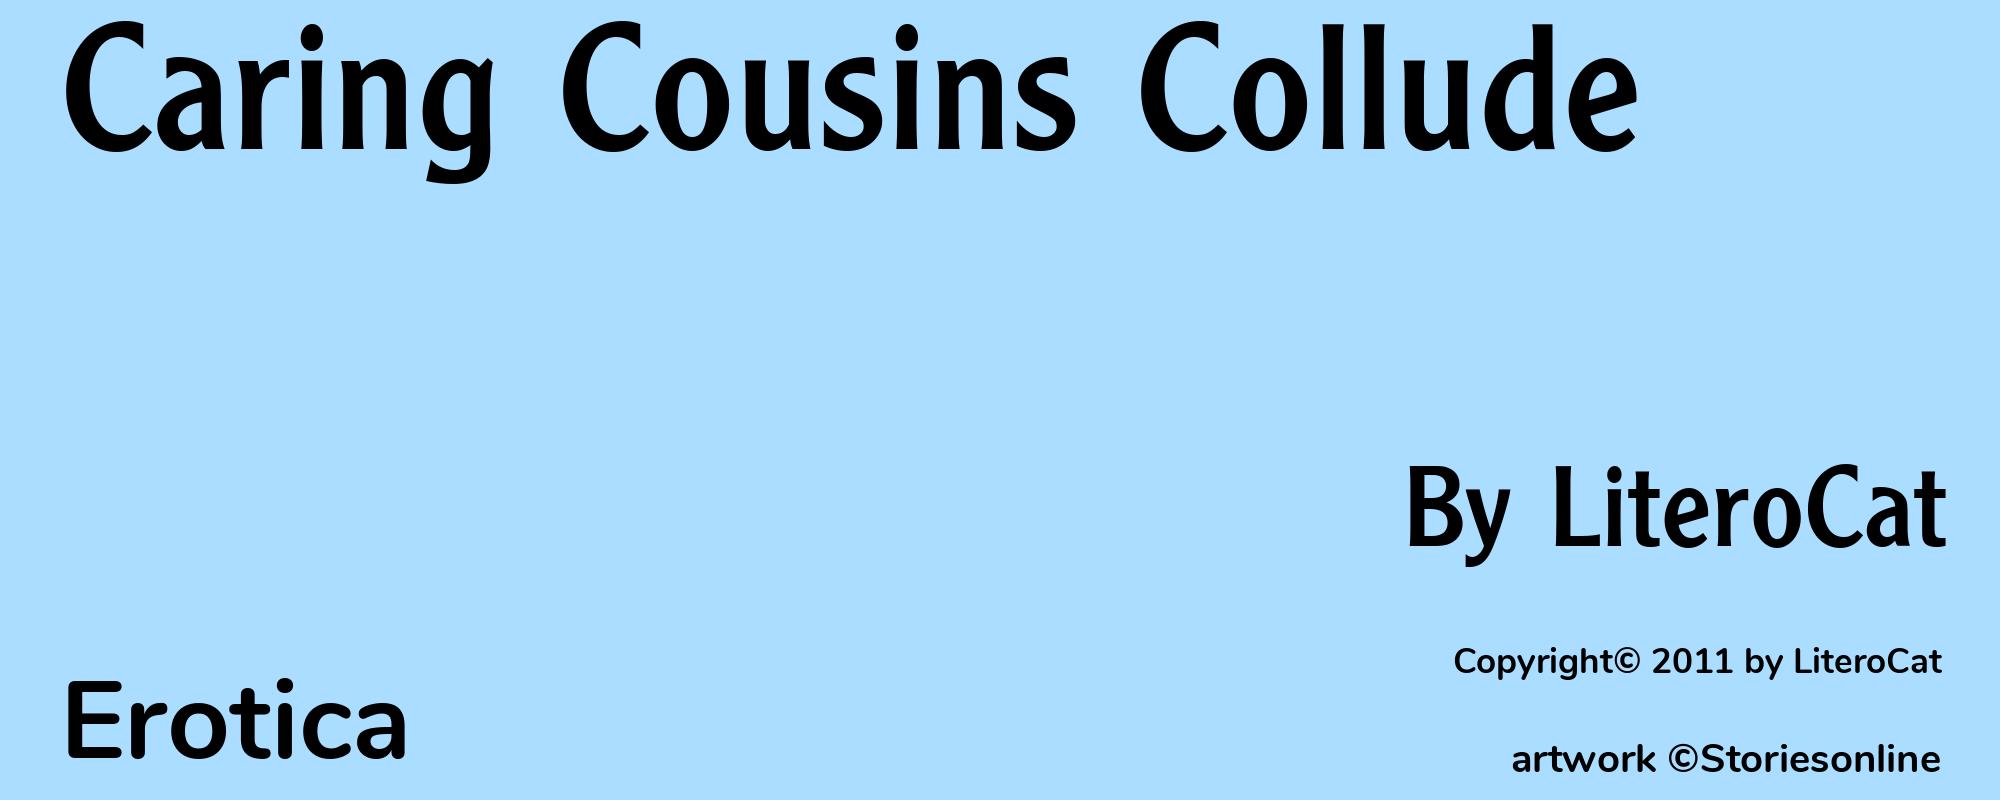 Caring Cousins Collude - Cover